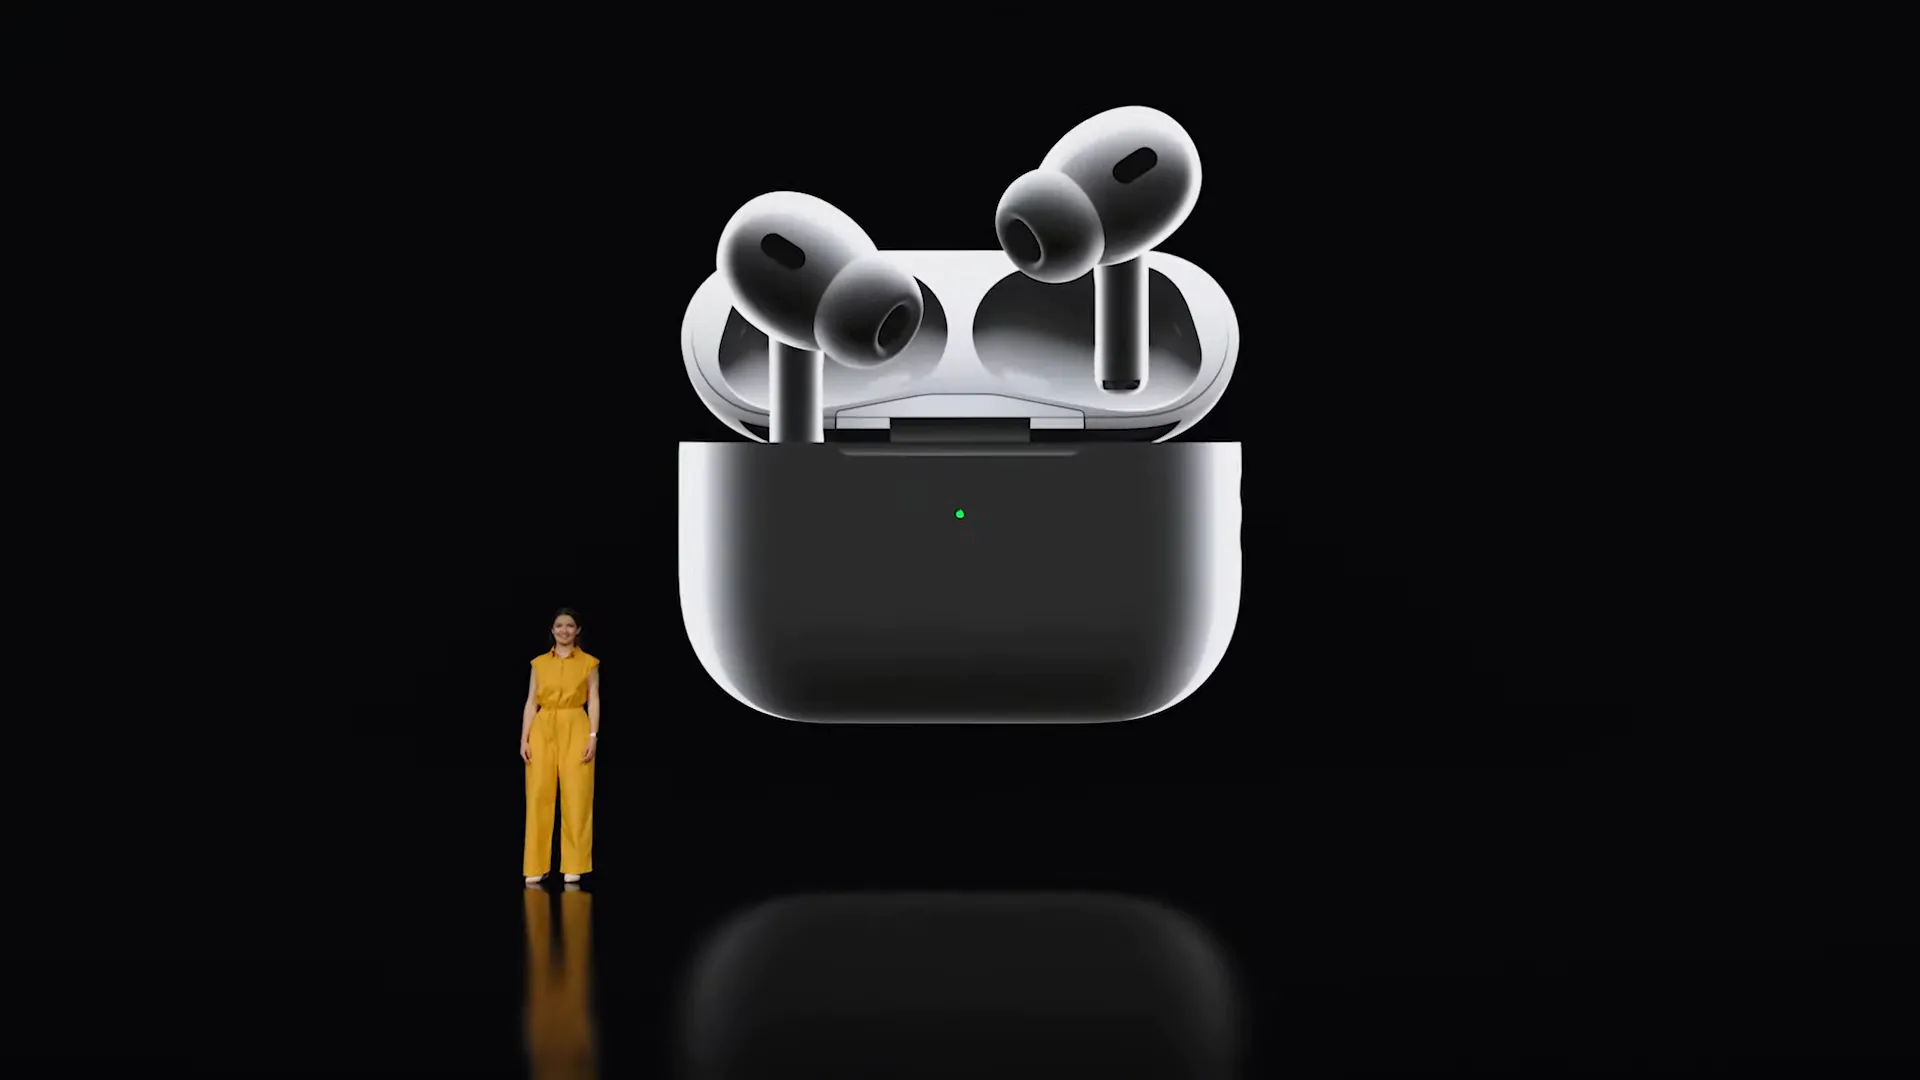 Breaking News: Apple's Next Big Thing - AirPods Pro with a Hearing Aid Feature Everyone's Talking About